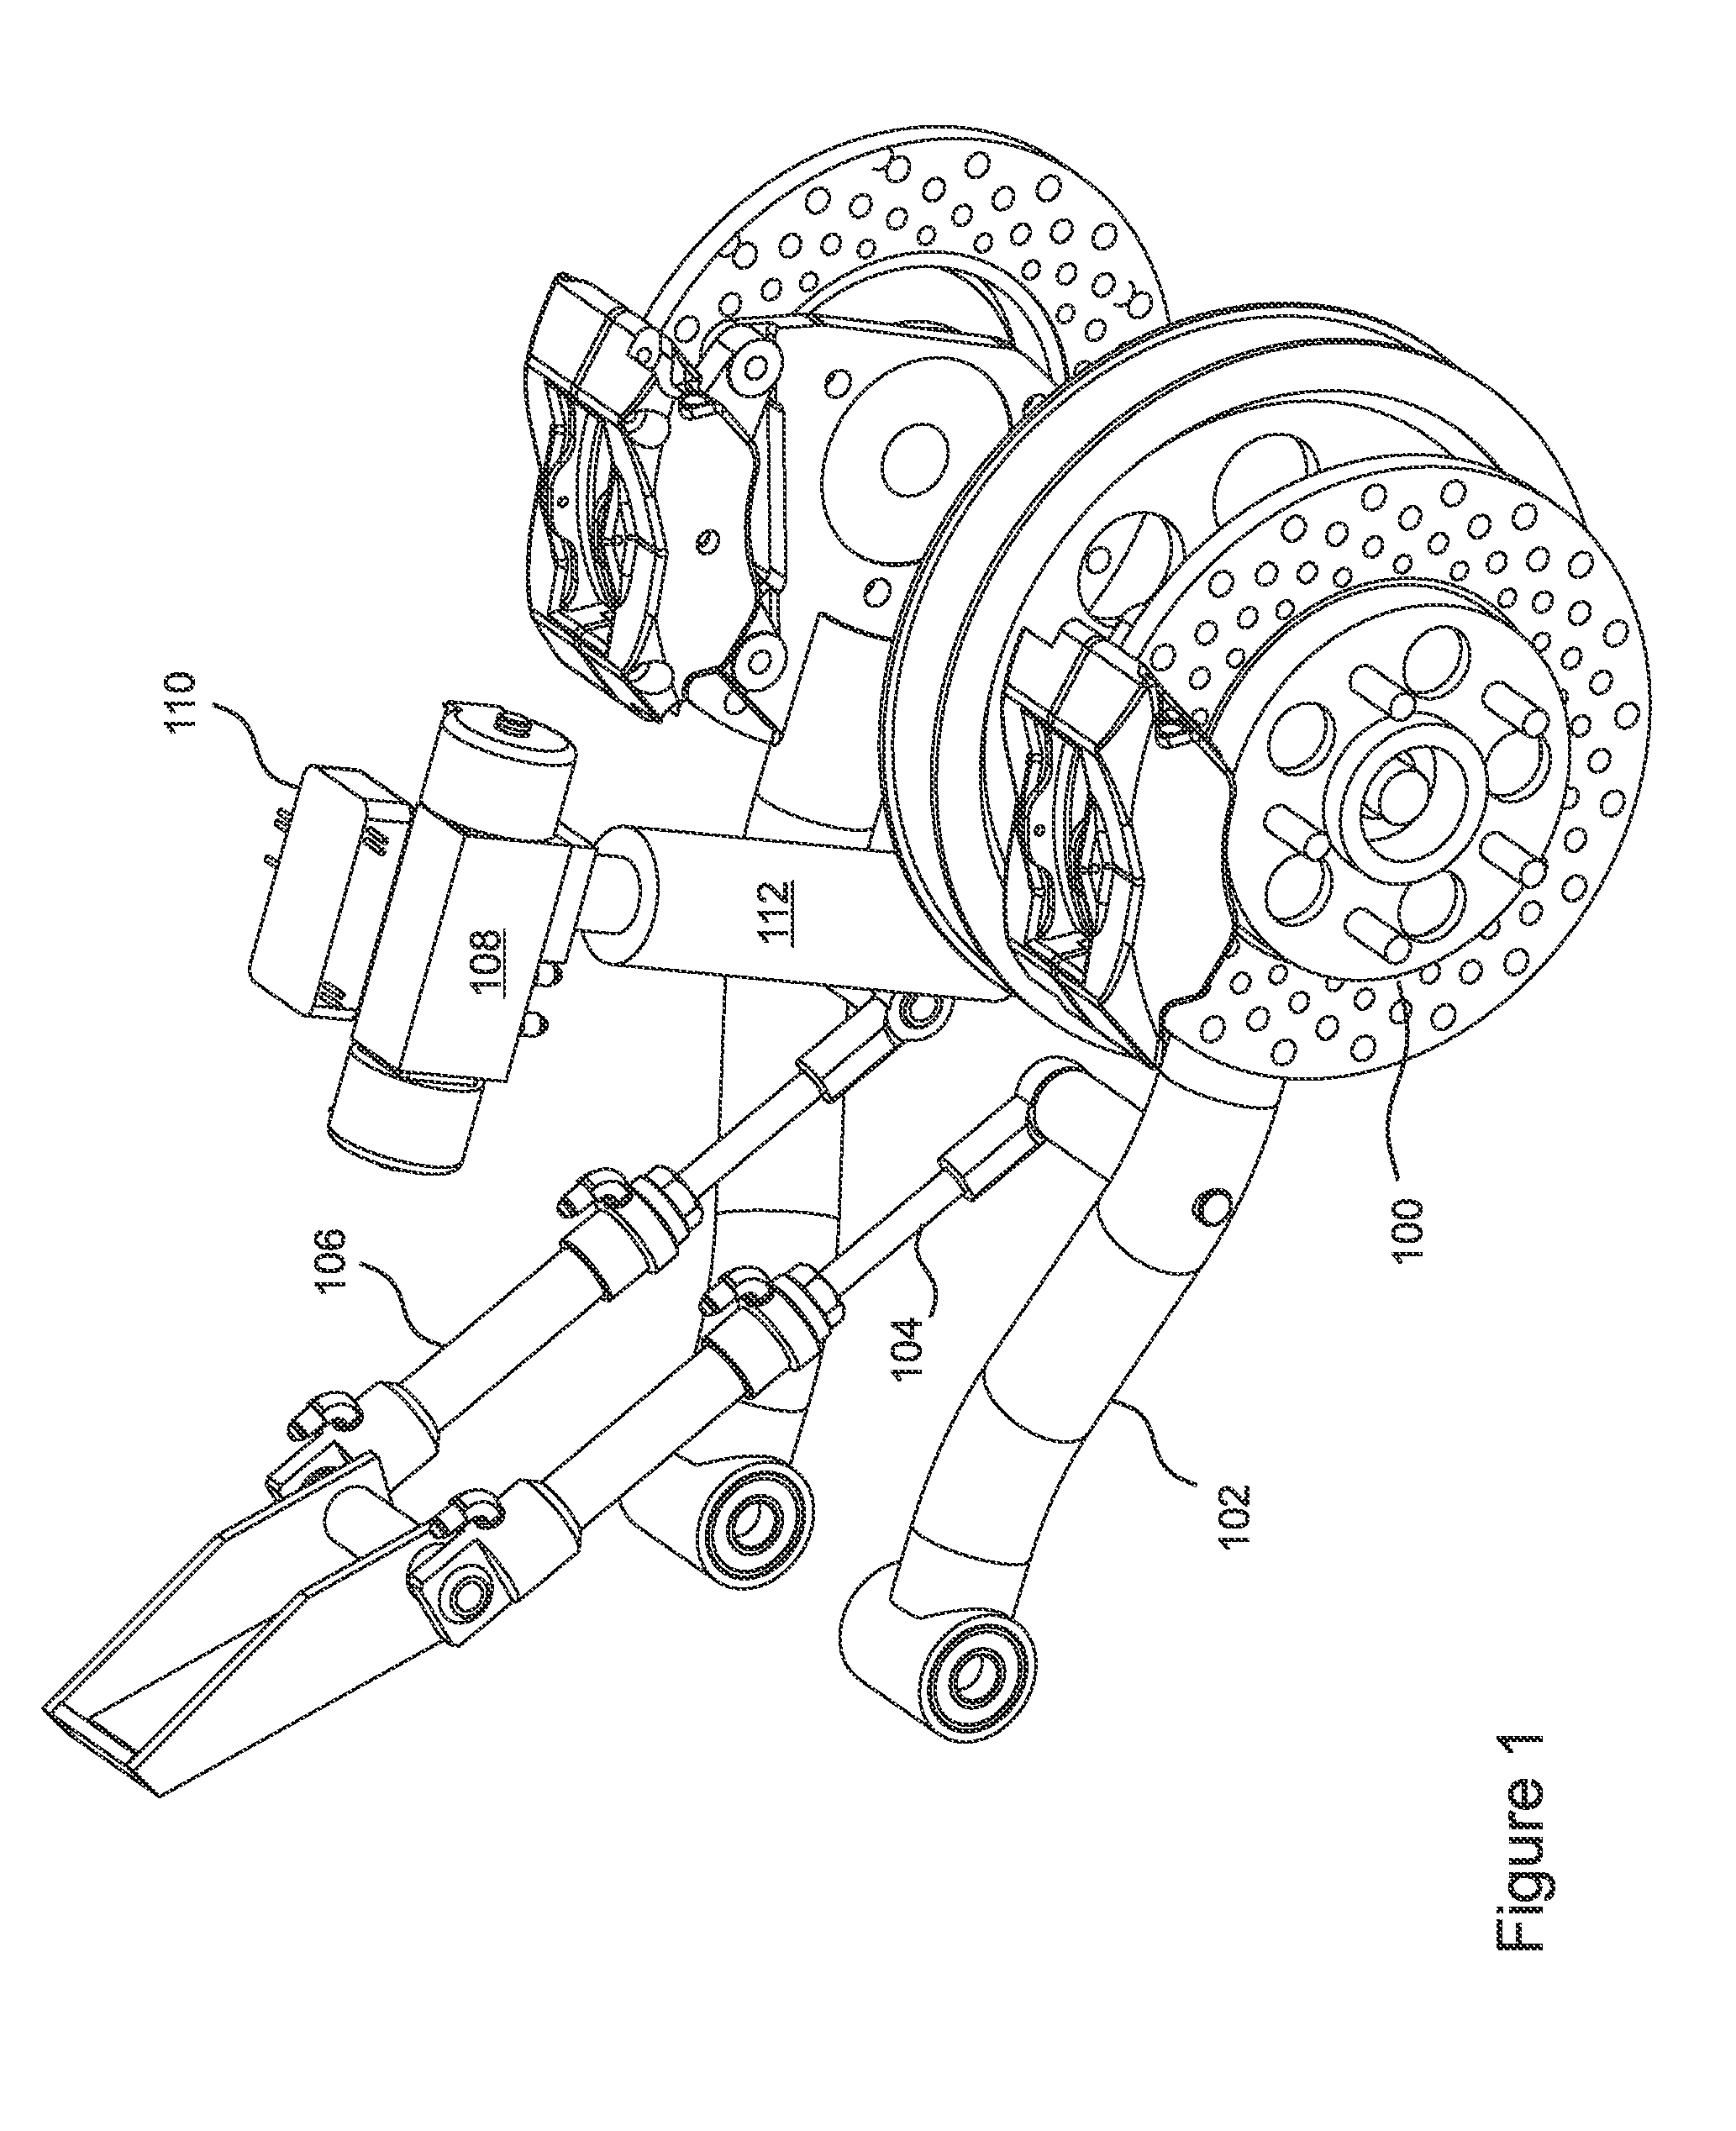 Hydraulic wheel suspension system for a 3-wheeled motorcycle